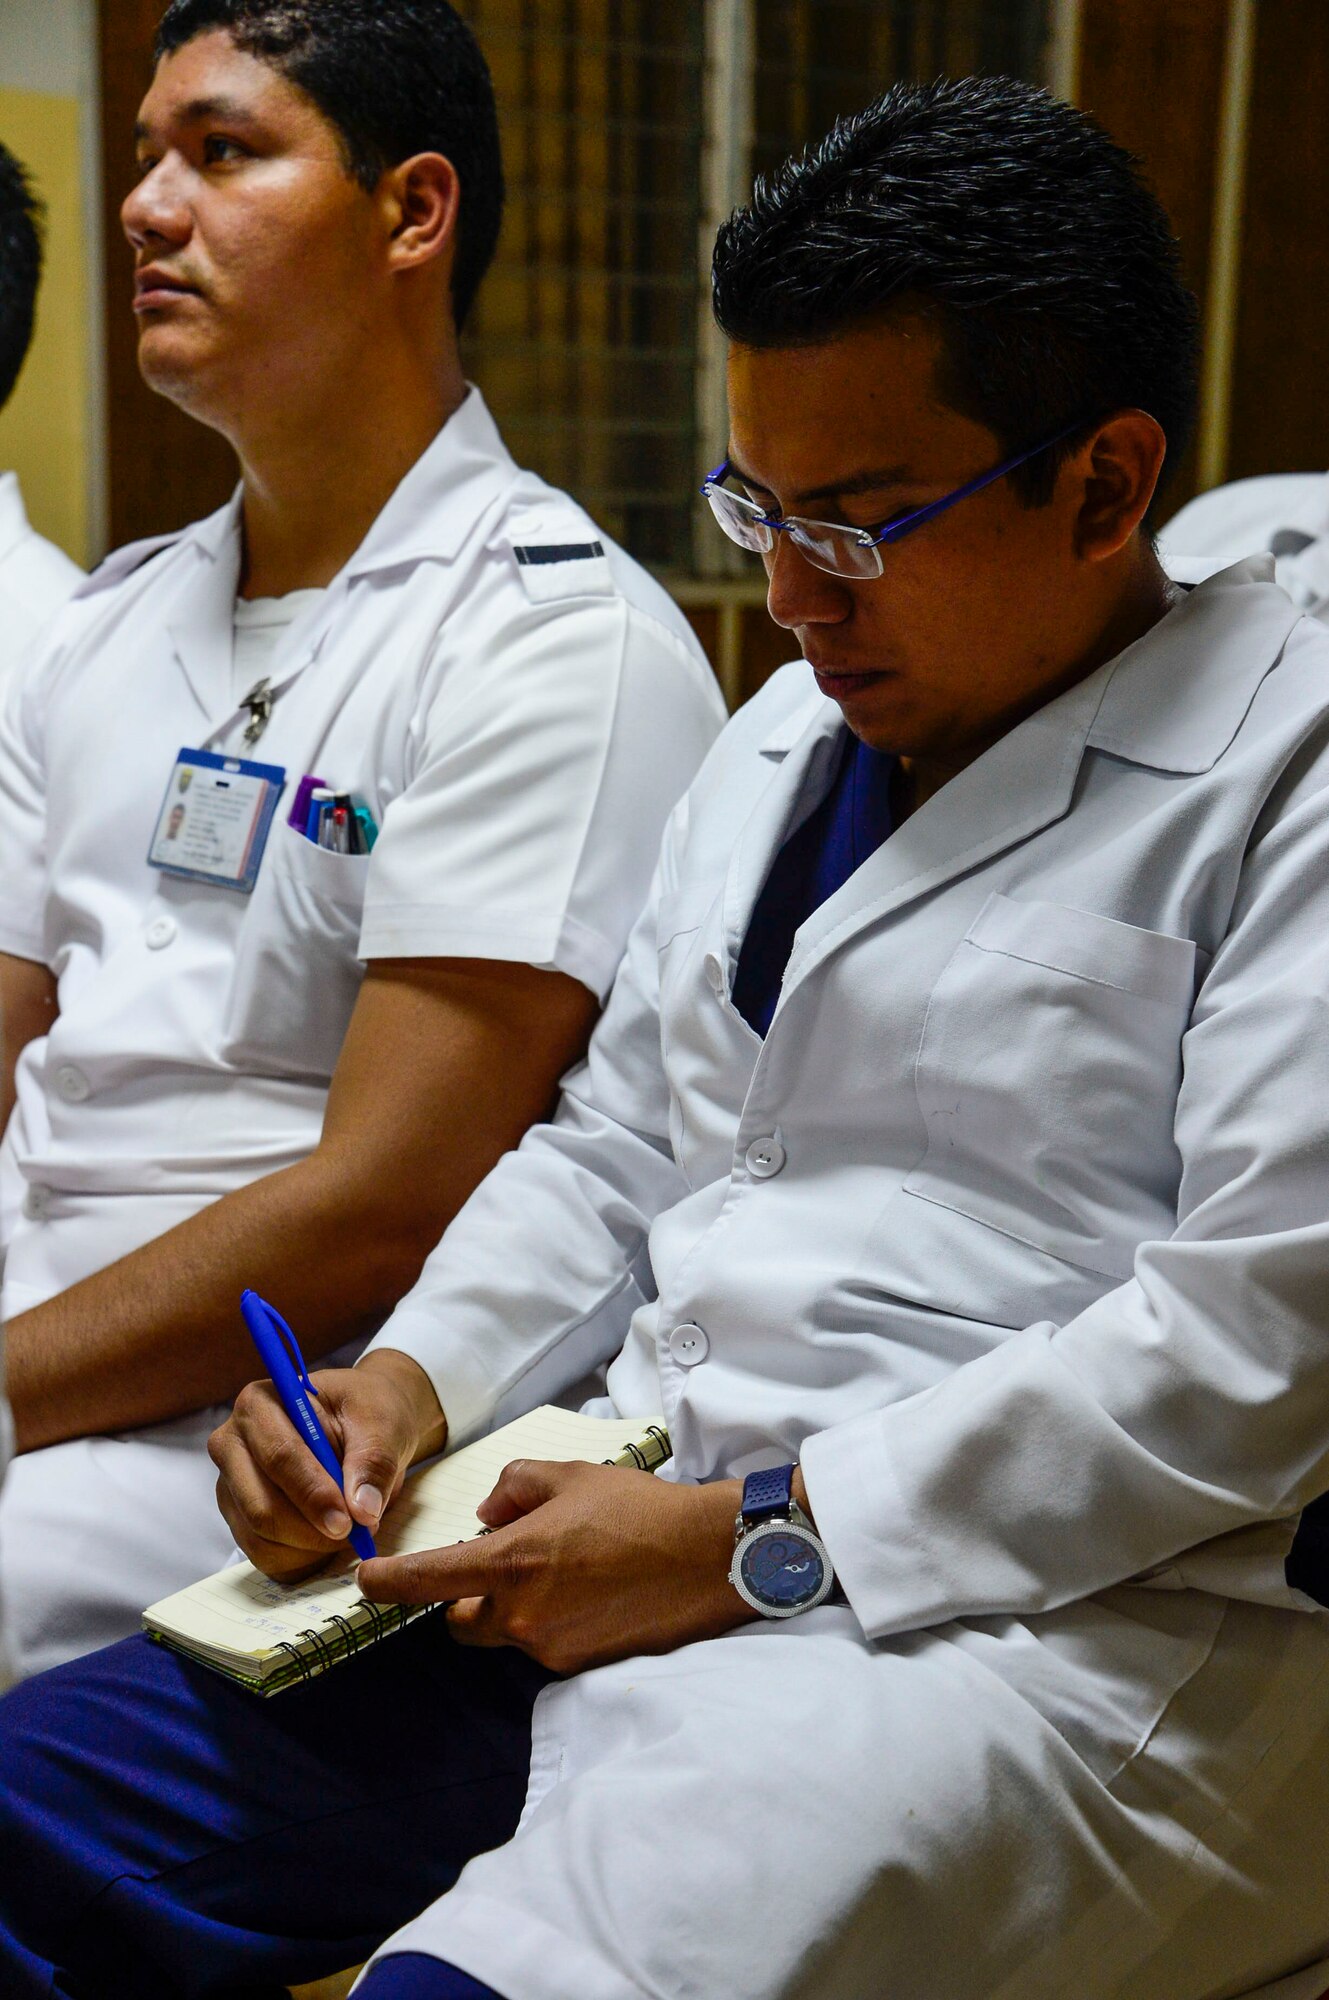 A medical technician in training at Hospital Militar de El Salvador takes notes during a briefing on first responder procedures given by U.S. Air Force Maj. Helda Carey, 12th Air Force (Air Forces Southern) international health specialist, during a medical subject matter expert exchange in San Salvador, El Salvador, March 11, 2016.  Earlier in the week, Carey led a team of Air Force medical professionals in a week-long exchange with Salvadoran medics at Ilopango Air Base.  After the subject matter expert exchange was completed, the team was invited to a share their expertise with members of the Hospital Militar de El Salvador.  (U.S. Air Force photo by Tech. Sgt. Heather R. Redman/Released)